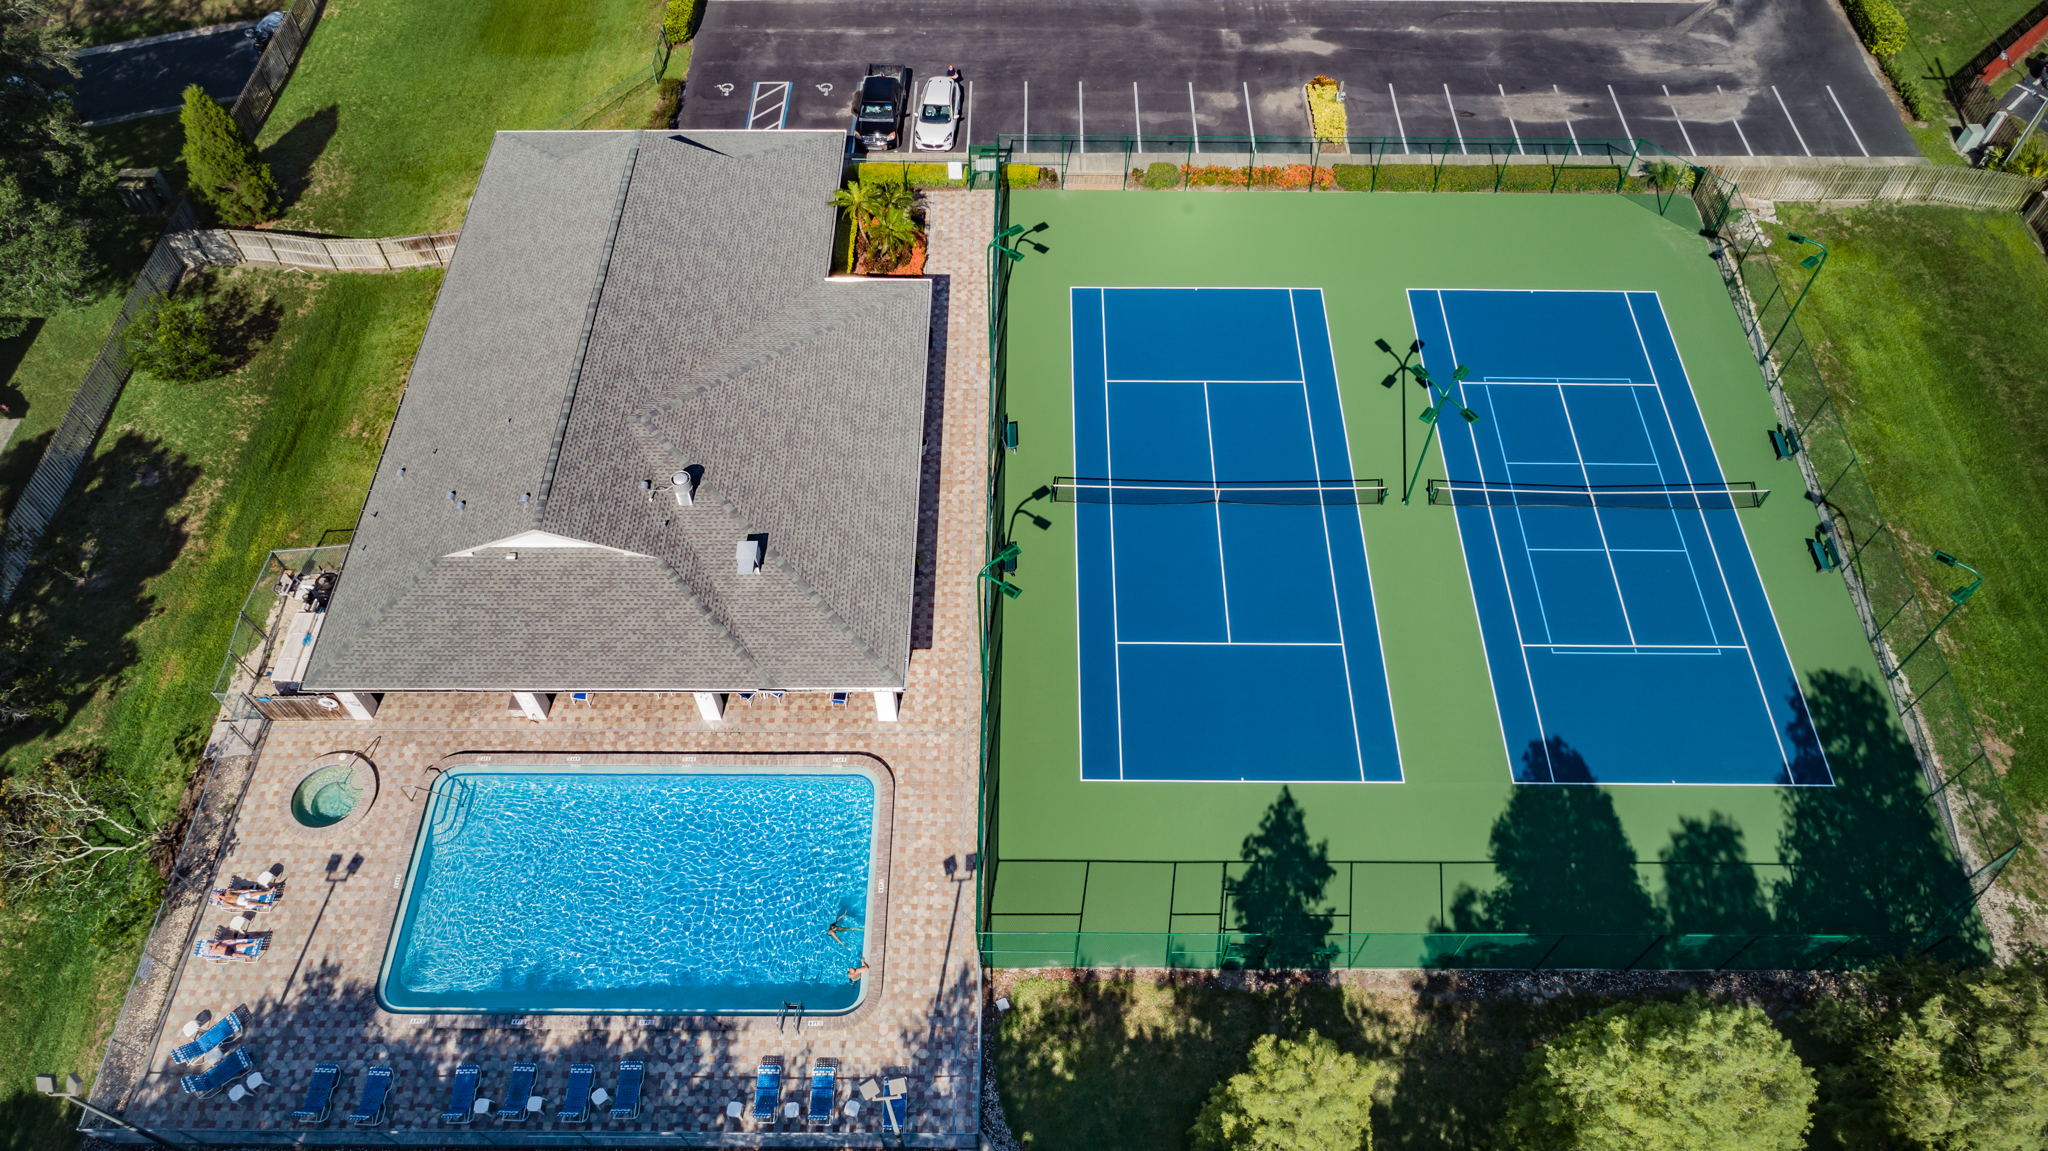 16-Tennis Court and Pool